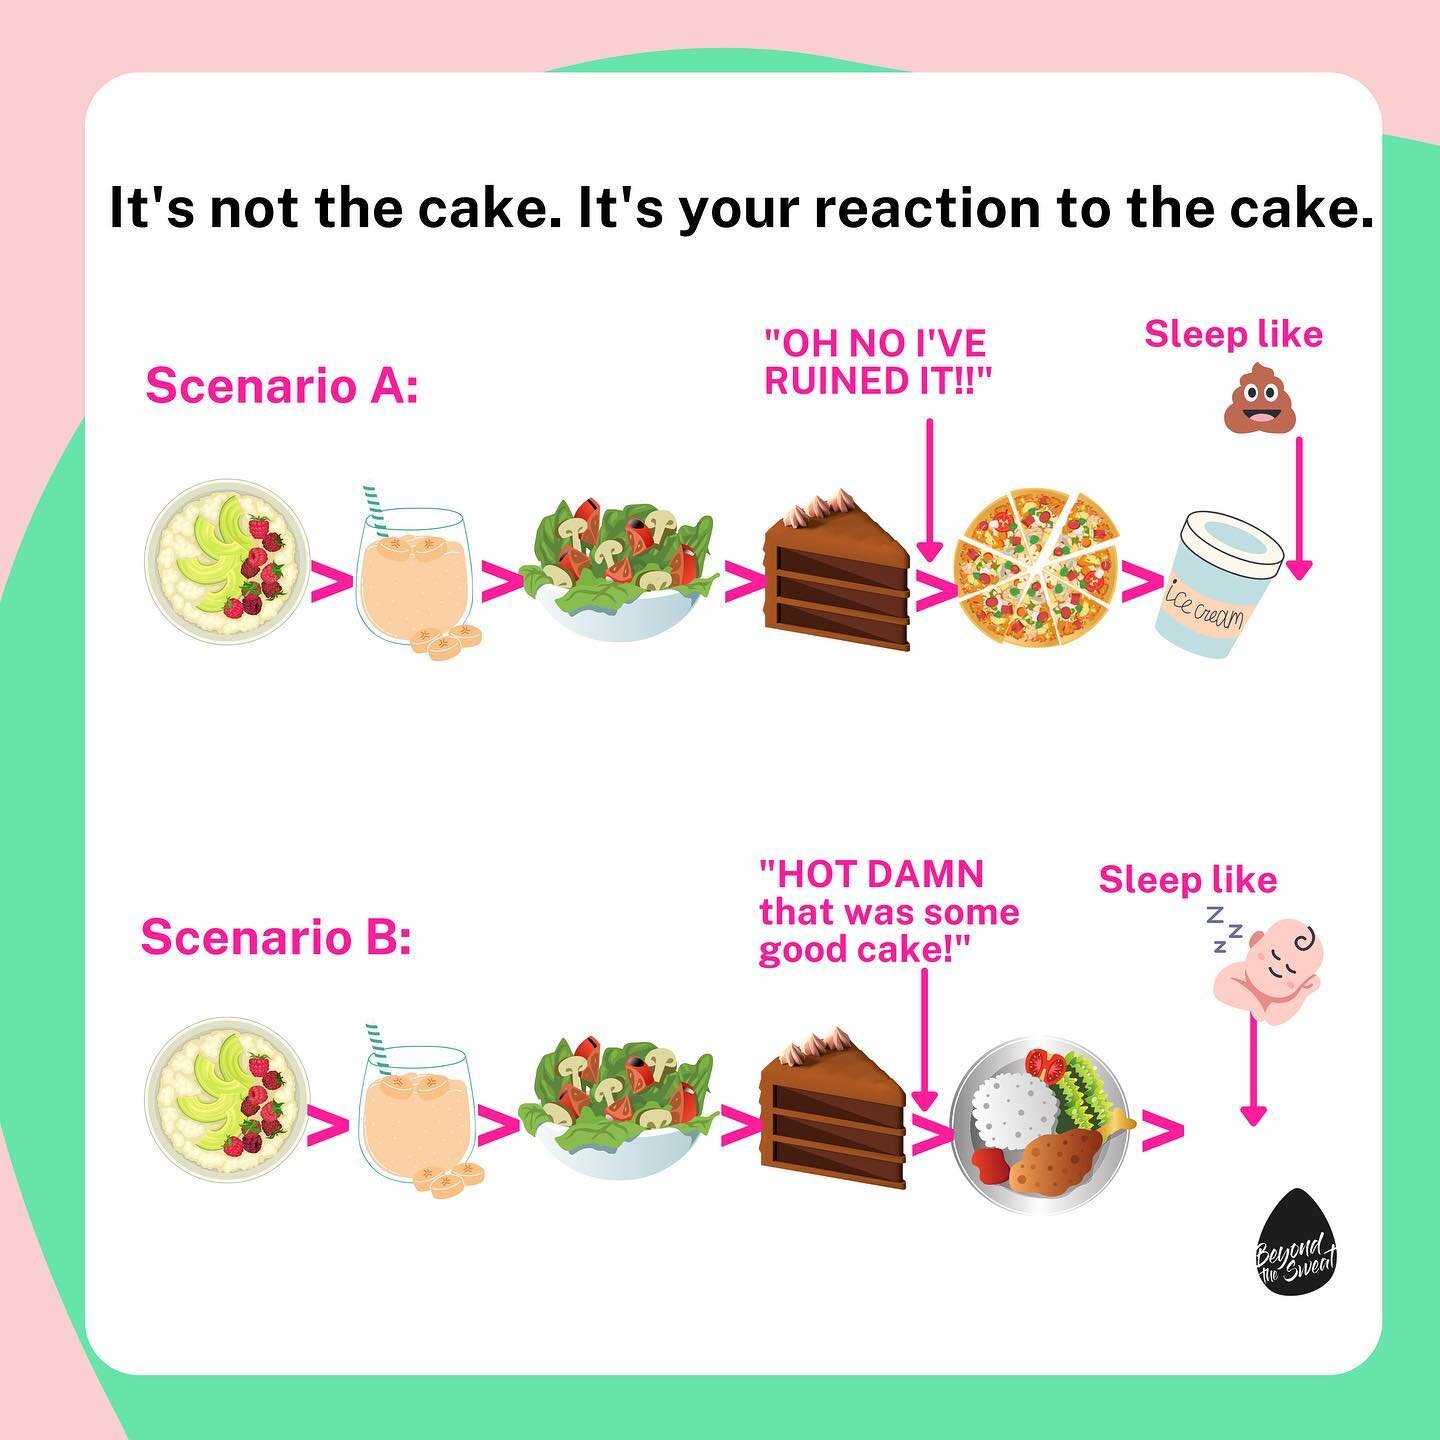 !!Reminder that you can eat a piece of cake as part of a completely healthy lifestyle!!

Yes, even if you're trying to improve your health.
Yes, even if weight loss is a goal you're pursuing. 
Yes, even if it puts you over your macro targets for the 